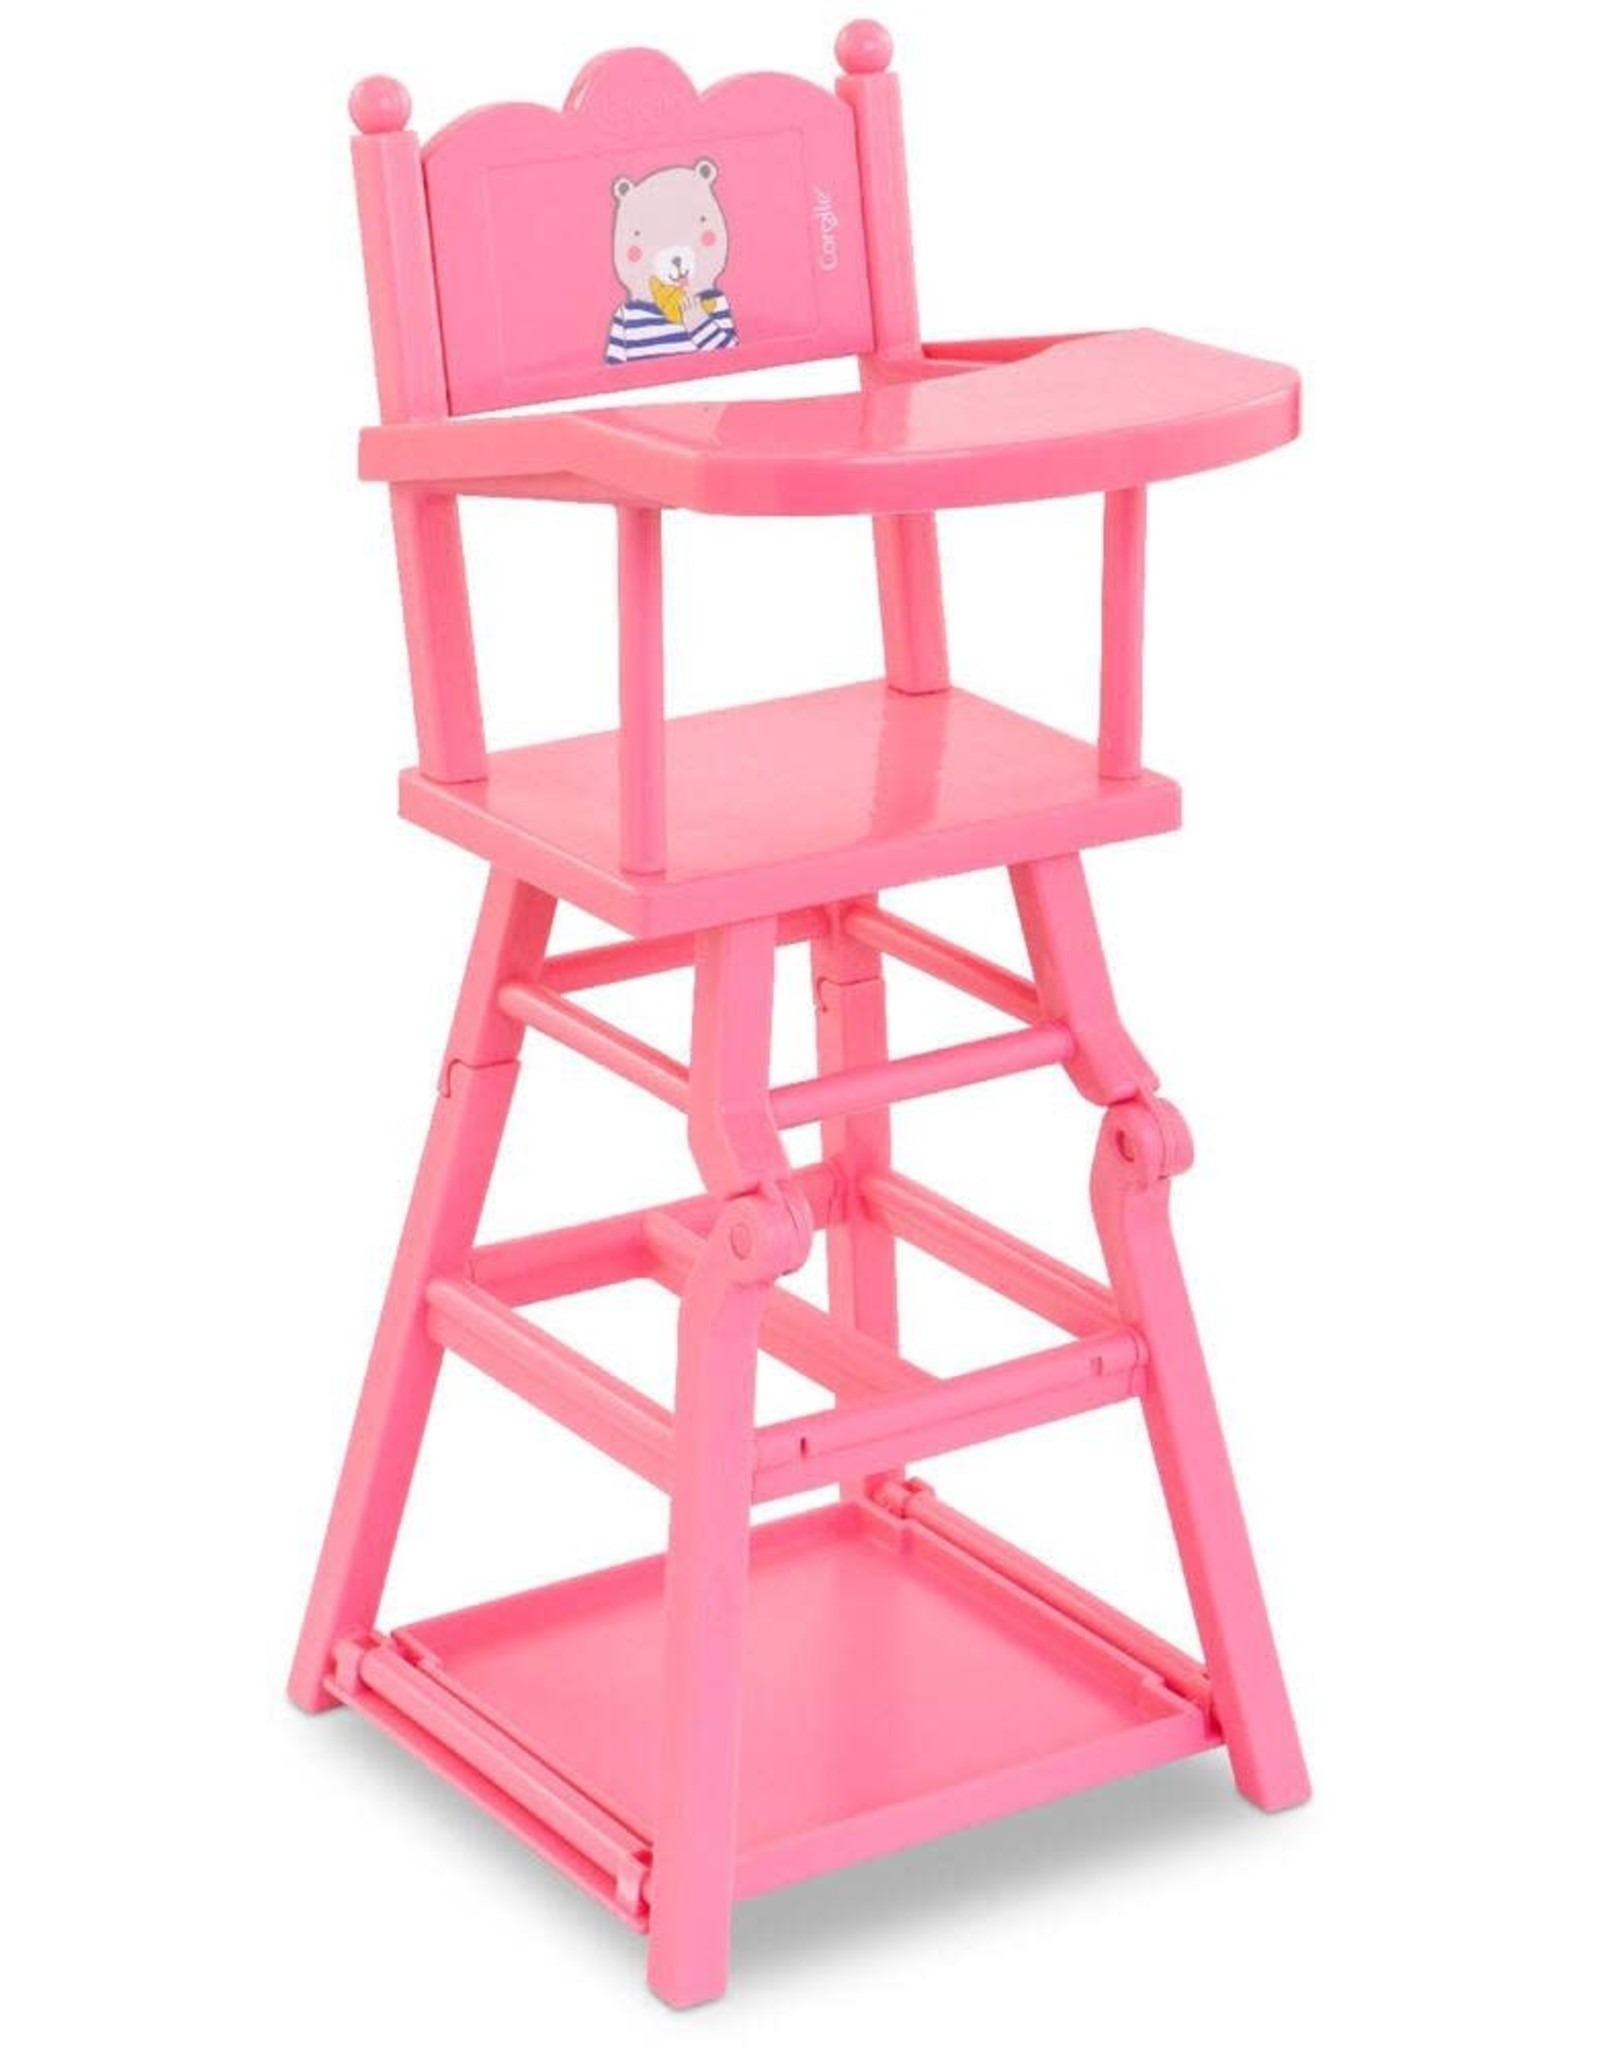 Corolle Corolle High Chair - Pink